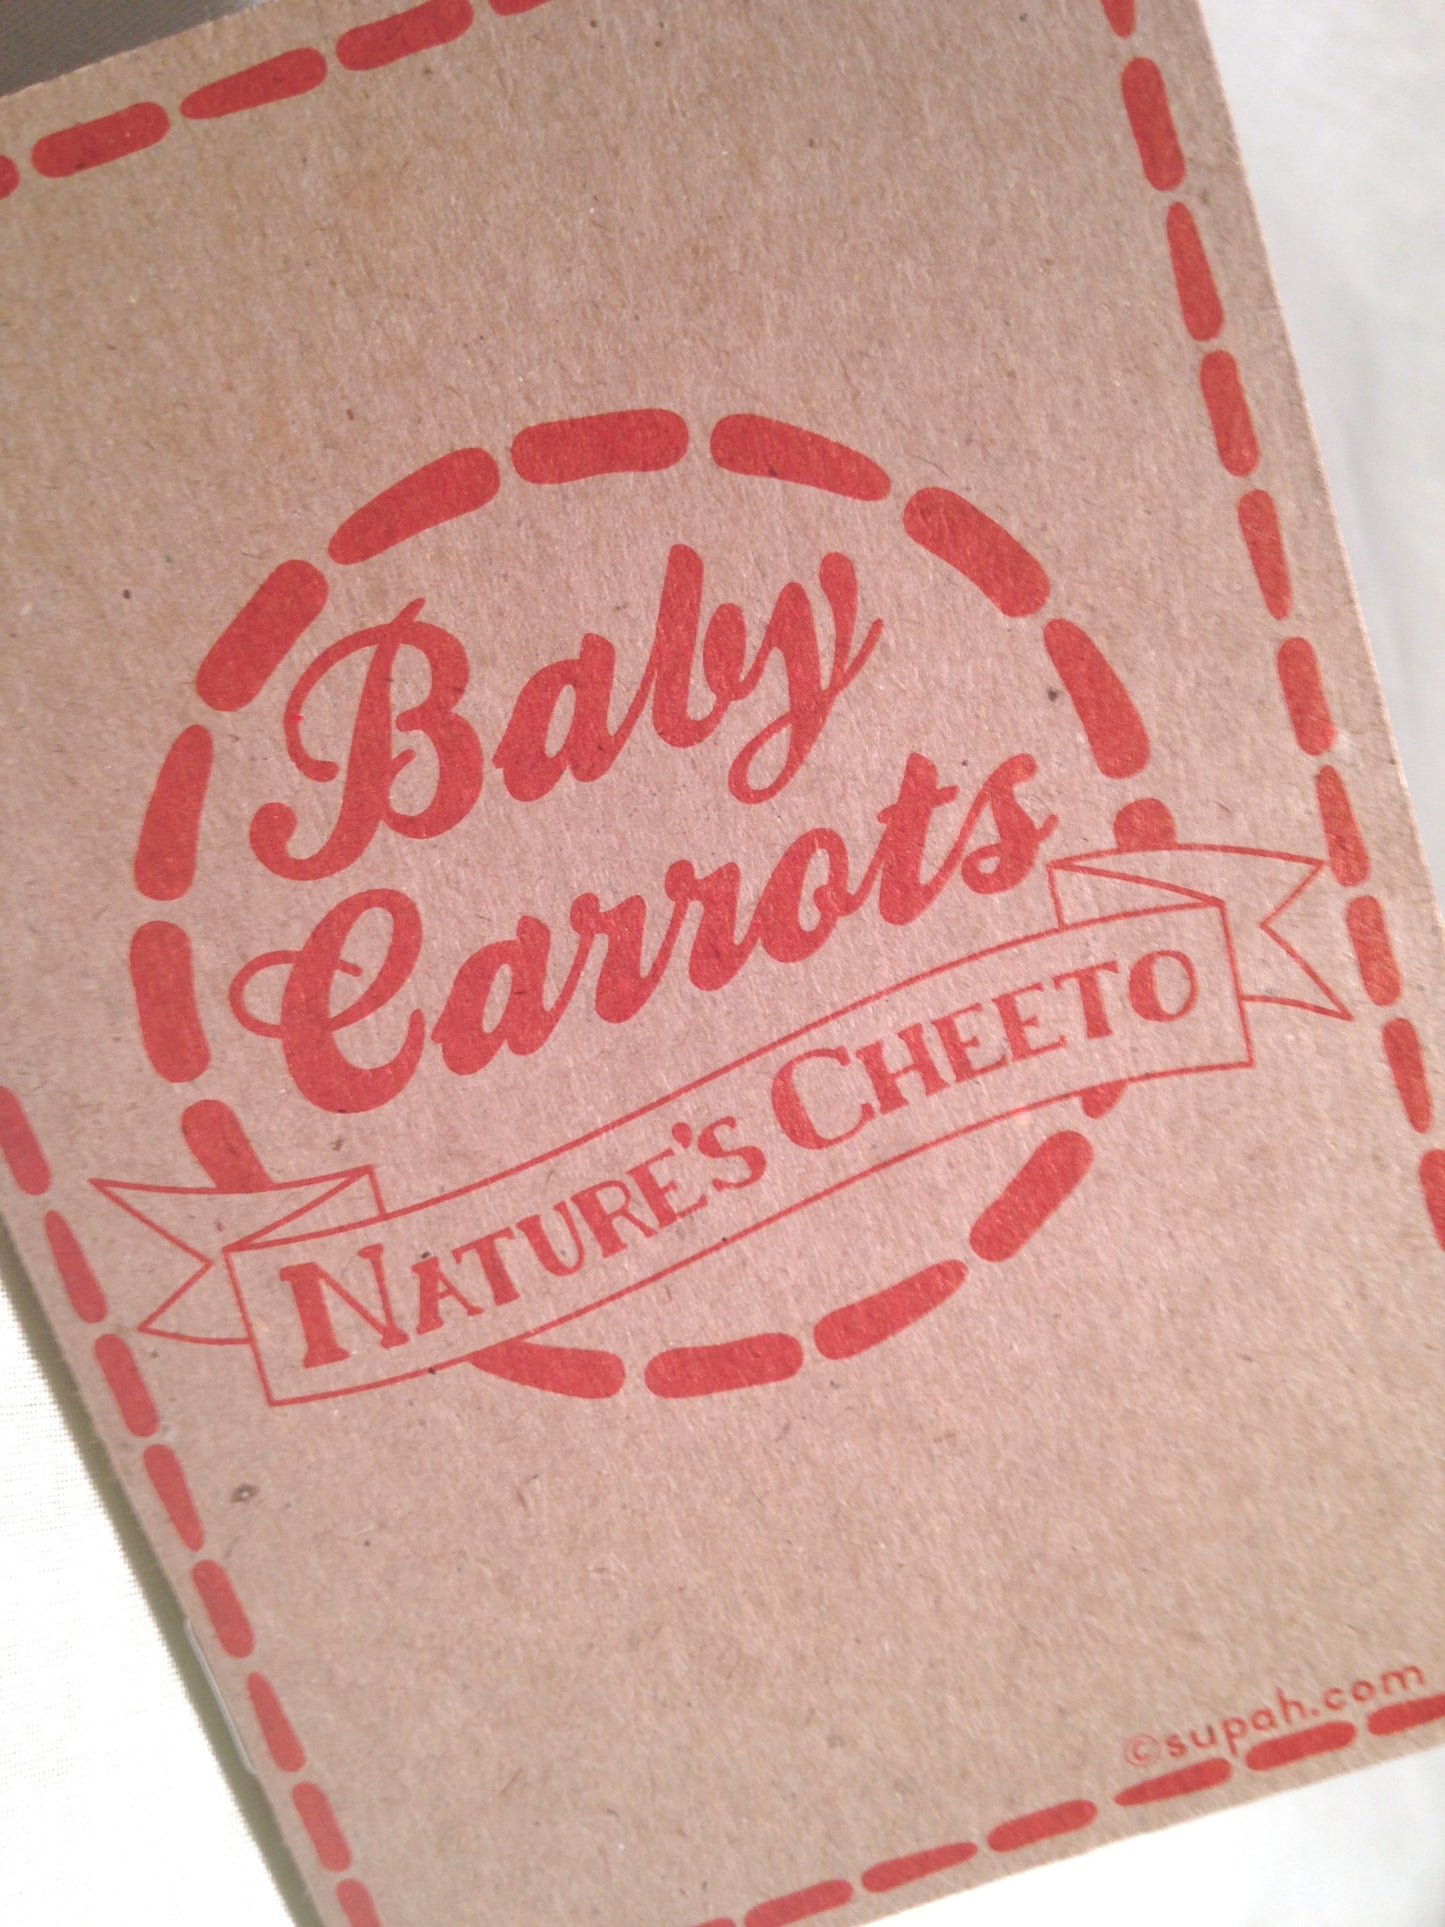 Baby Carrots: Nature's Cheeto Pocket Food Journal